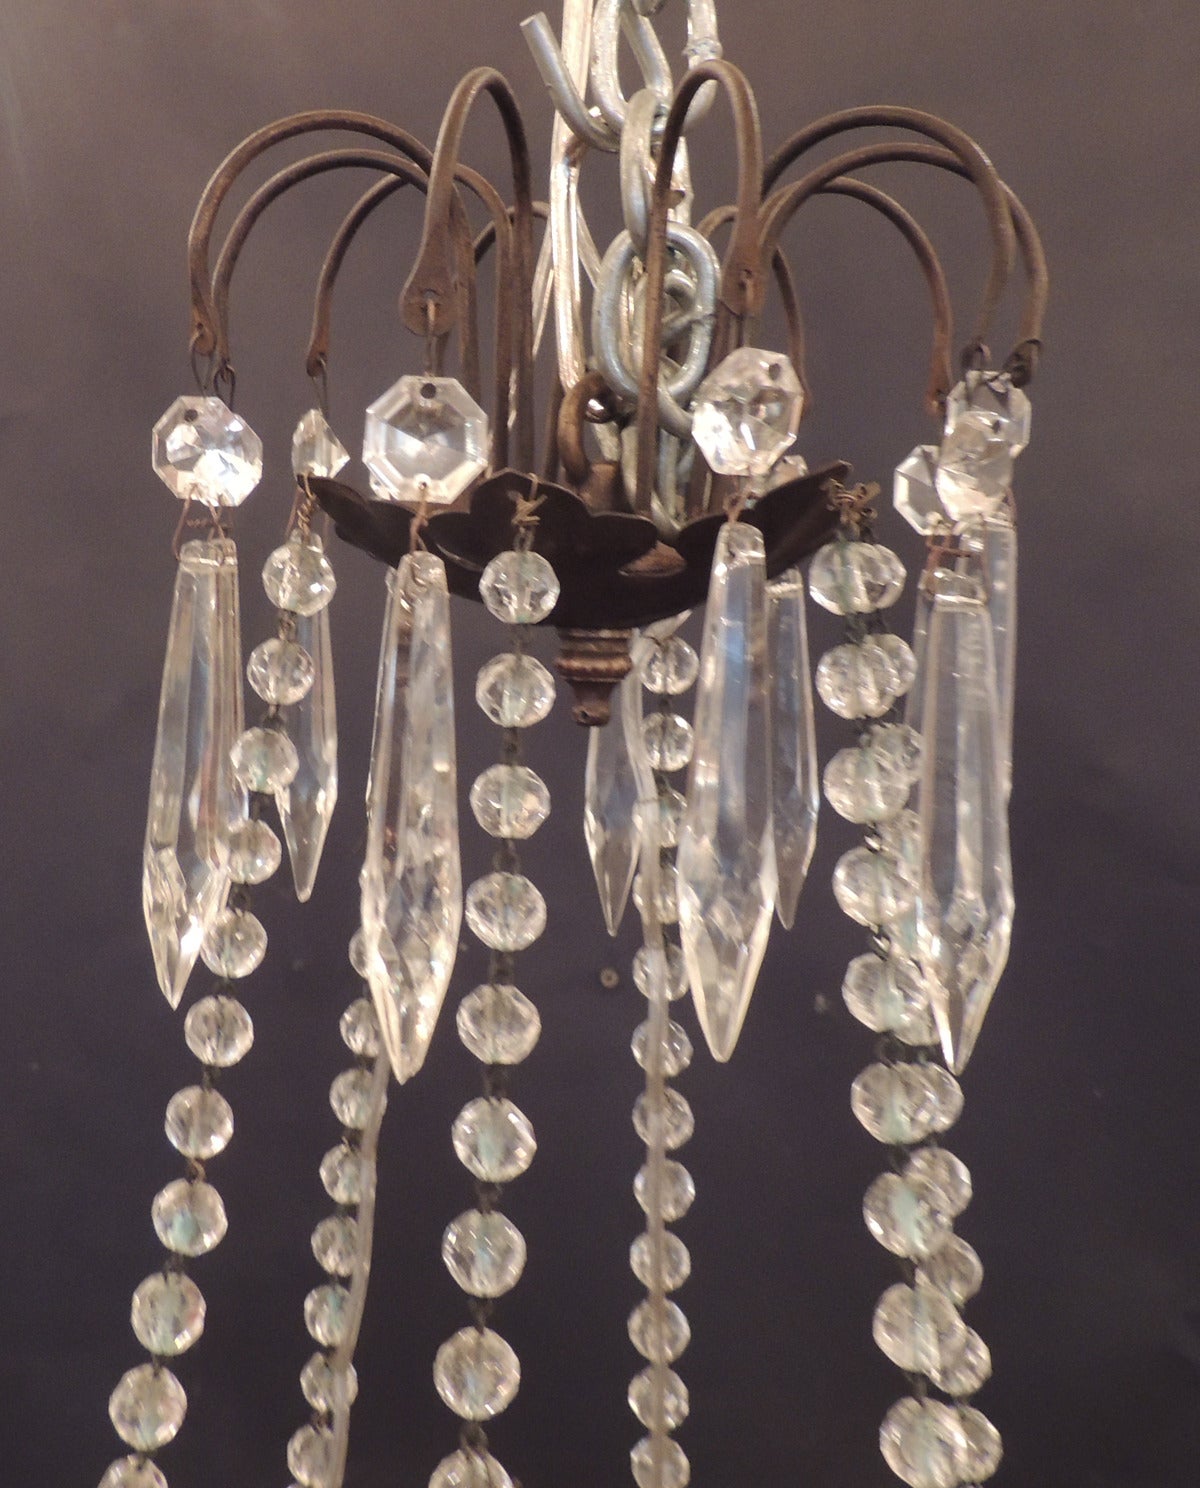 This Italian Neoclassical chandelier was made in the mid-19th century, circa 1850, and features crystal prisms at the top surrounded by four crystal chains that suspend the bottom of the chandelier. The bottom section of the chandelier had six